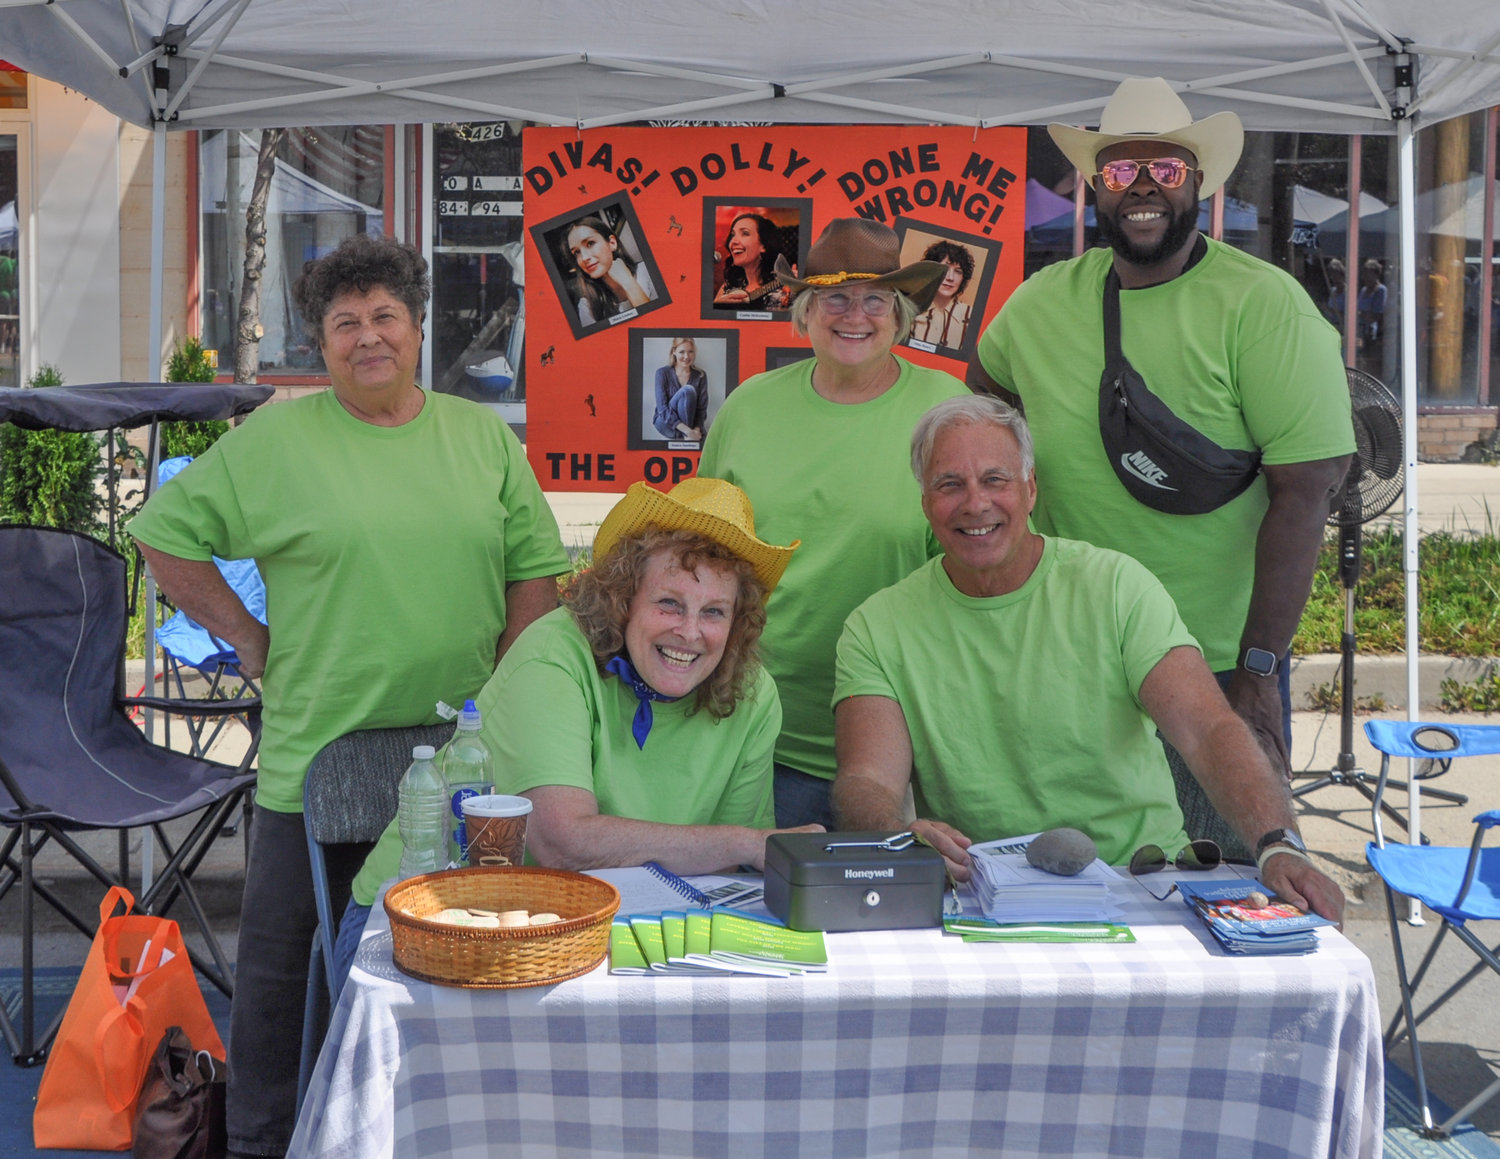 Members of the Delaware Valley Opera company were all smiles during the Bagel Festival, held in Monticello, NY last weekend. I was feeling a little "cross and bitterish" but I put on a happy face for Dharma's adoring fans.